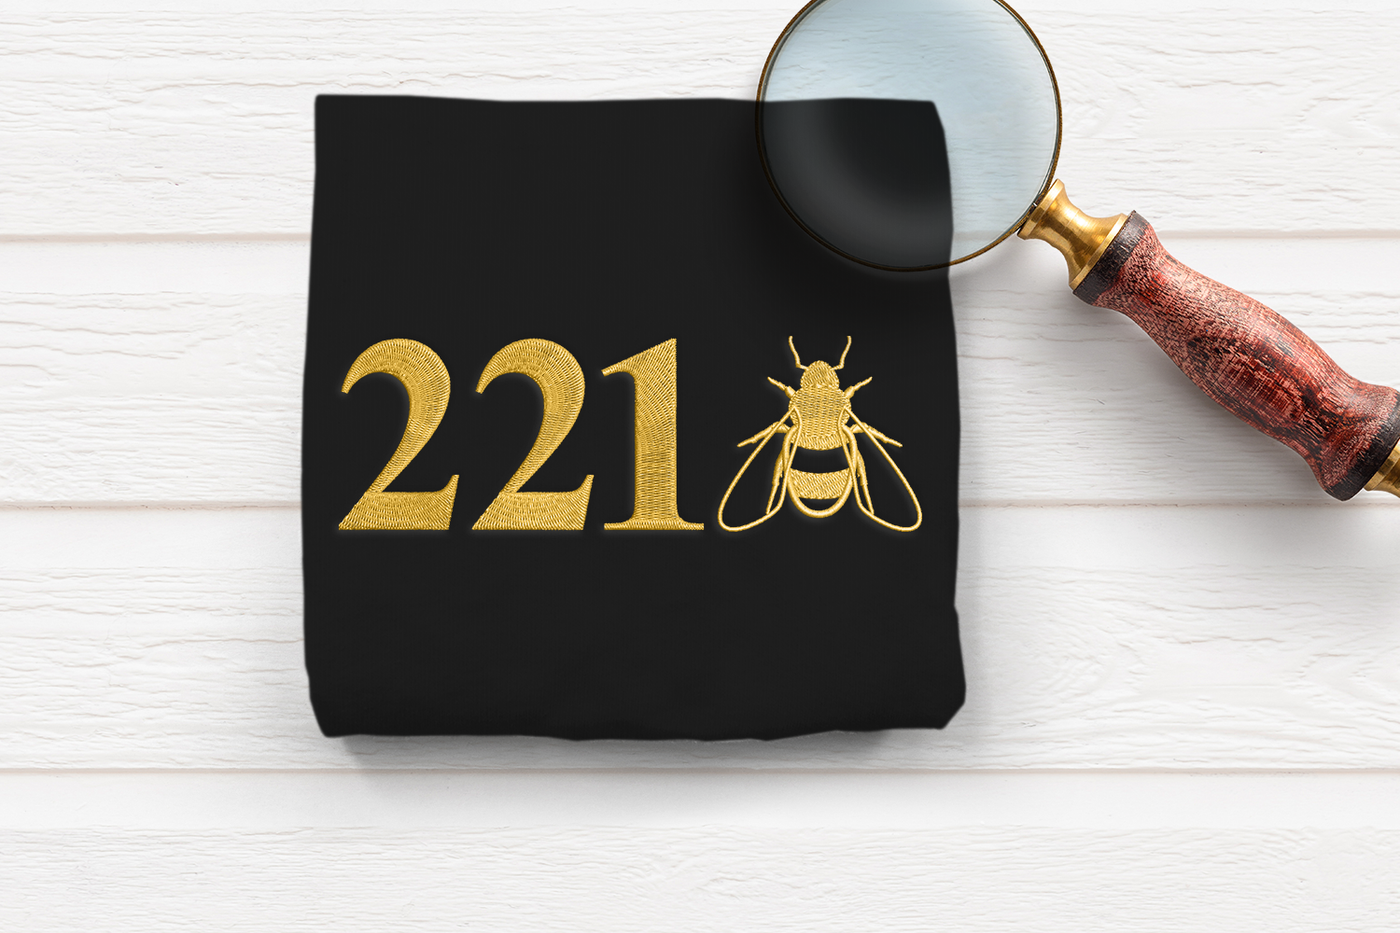 Embroidery of the number 221 with a realistic bee embroidery next to it.